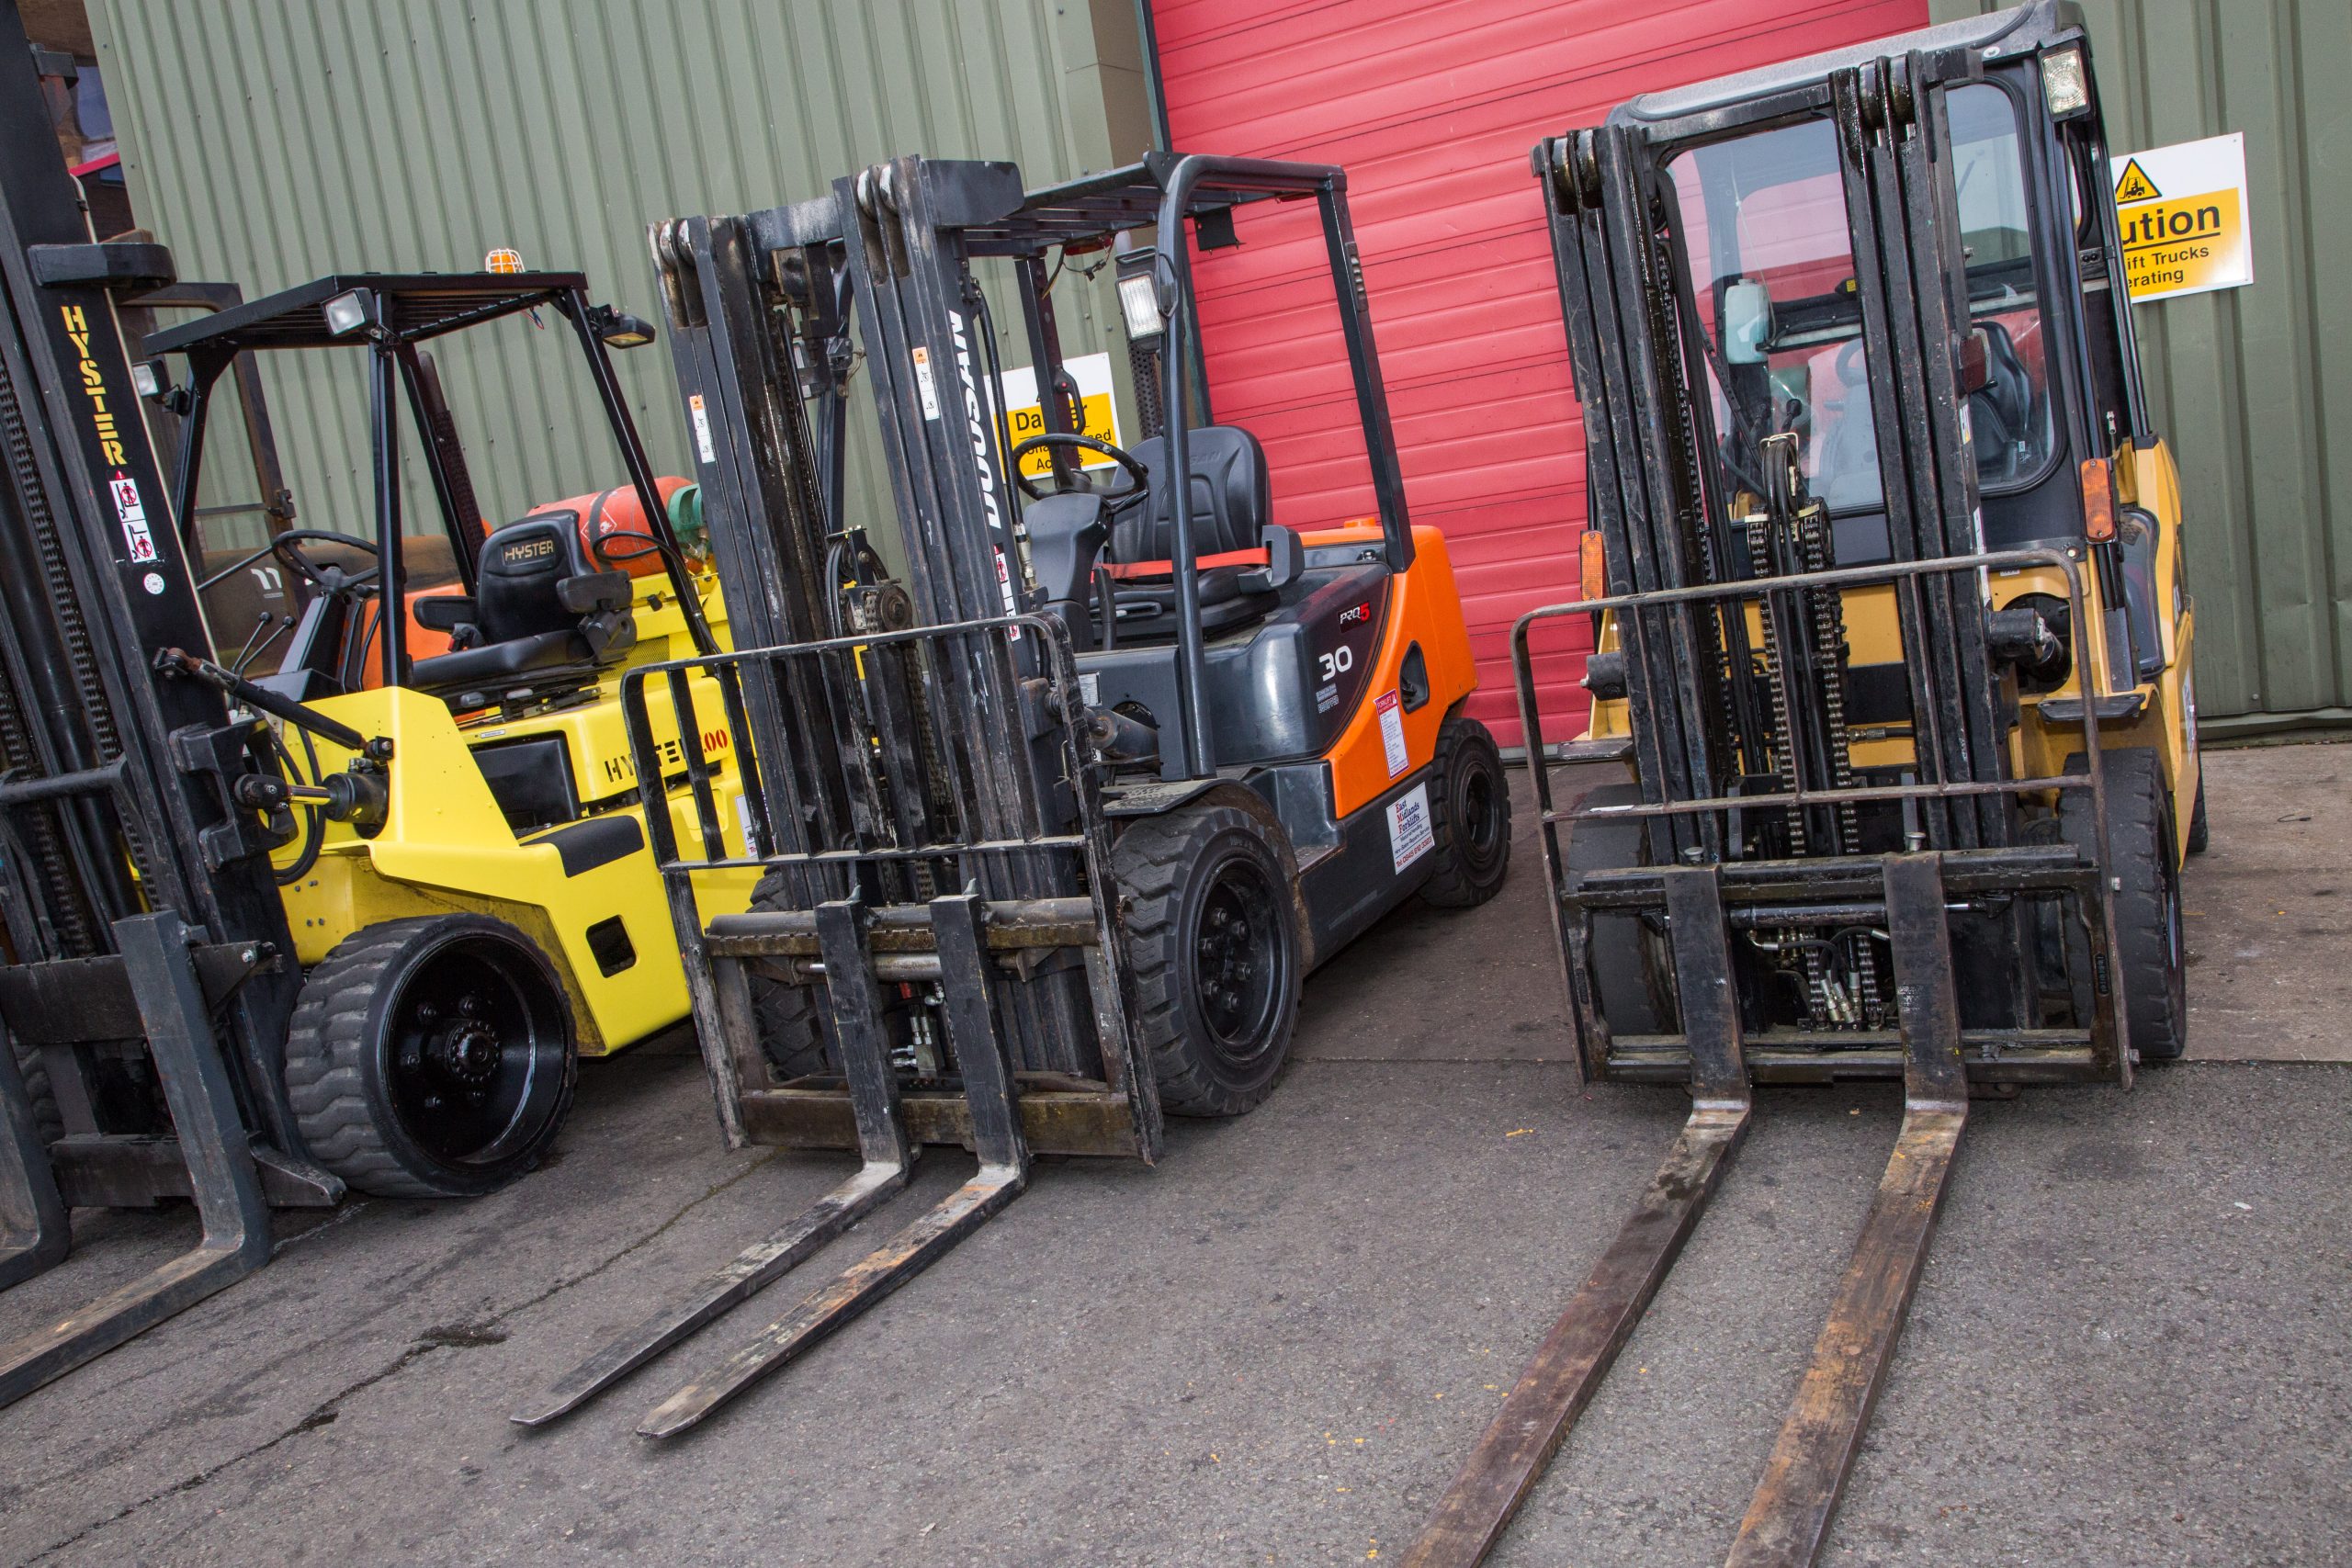 Is a forklift course hard?